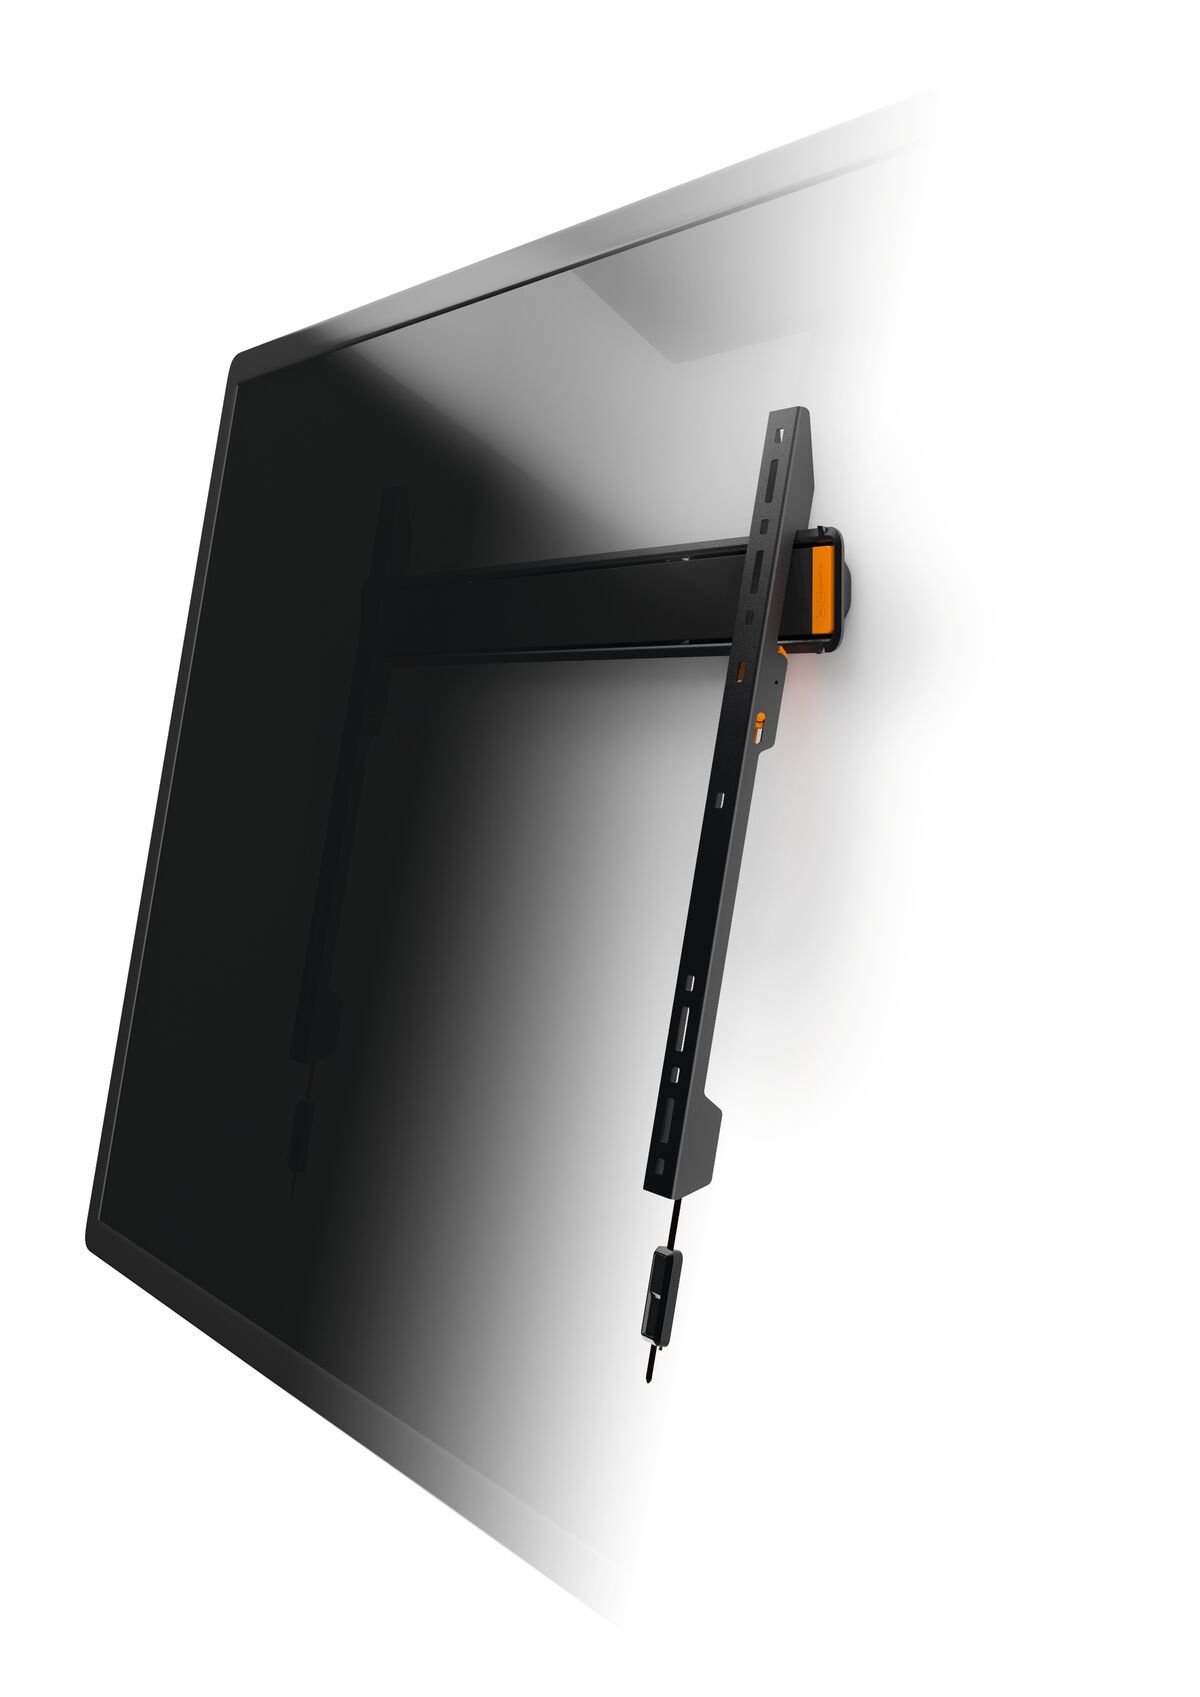 Vogel's WALL 2305 Fixed TV Wall Mount - Suitable for 40 up to 80 inch TVs up to Application